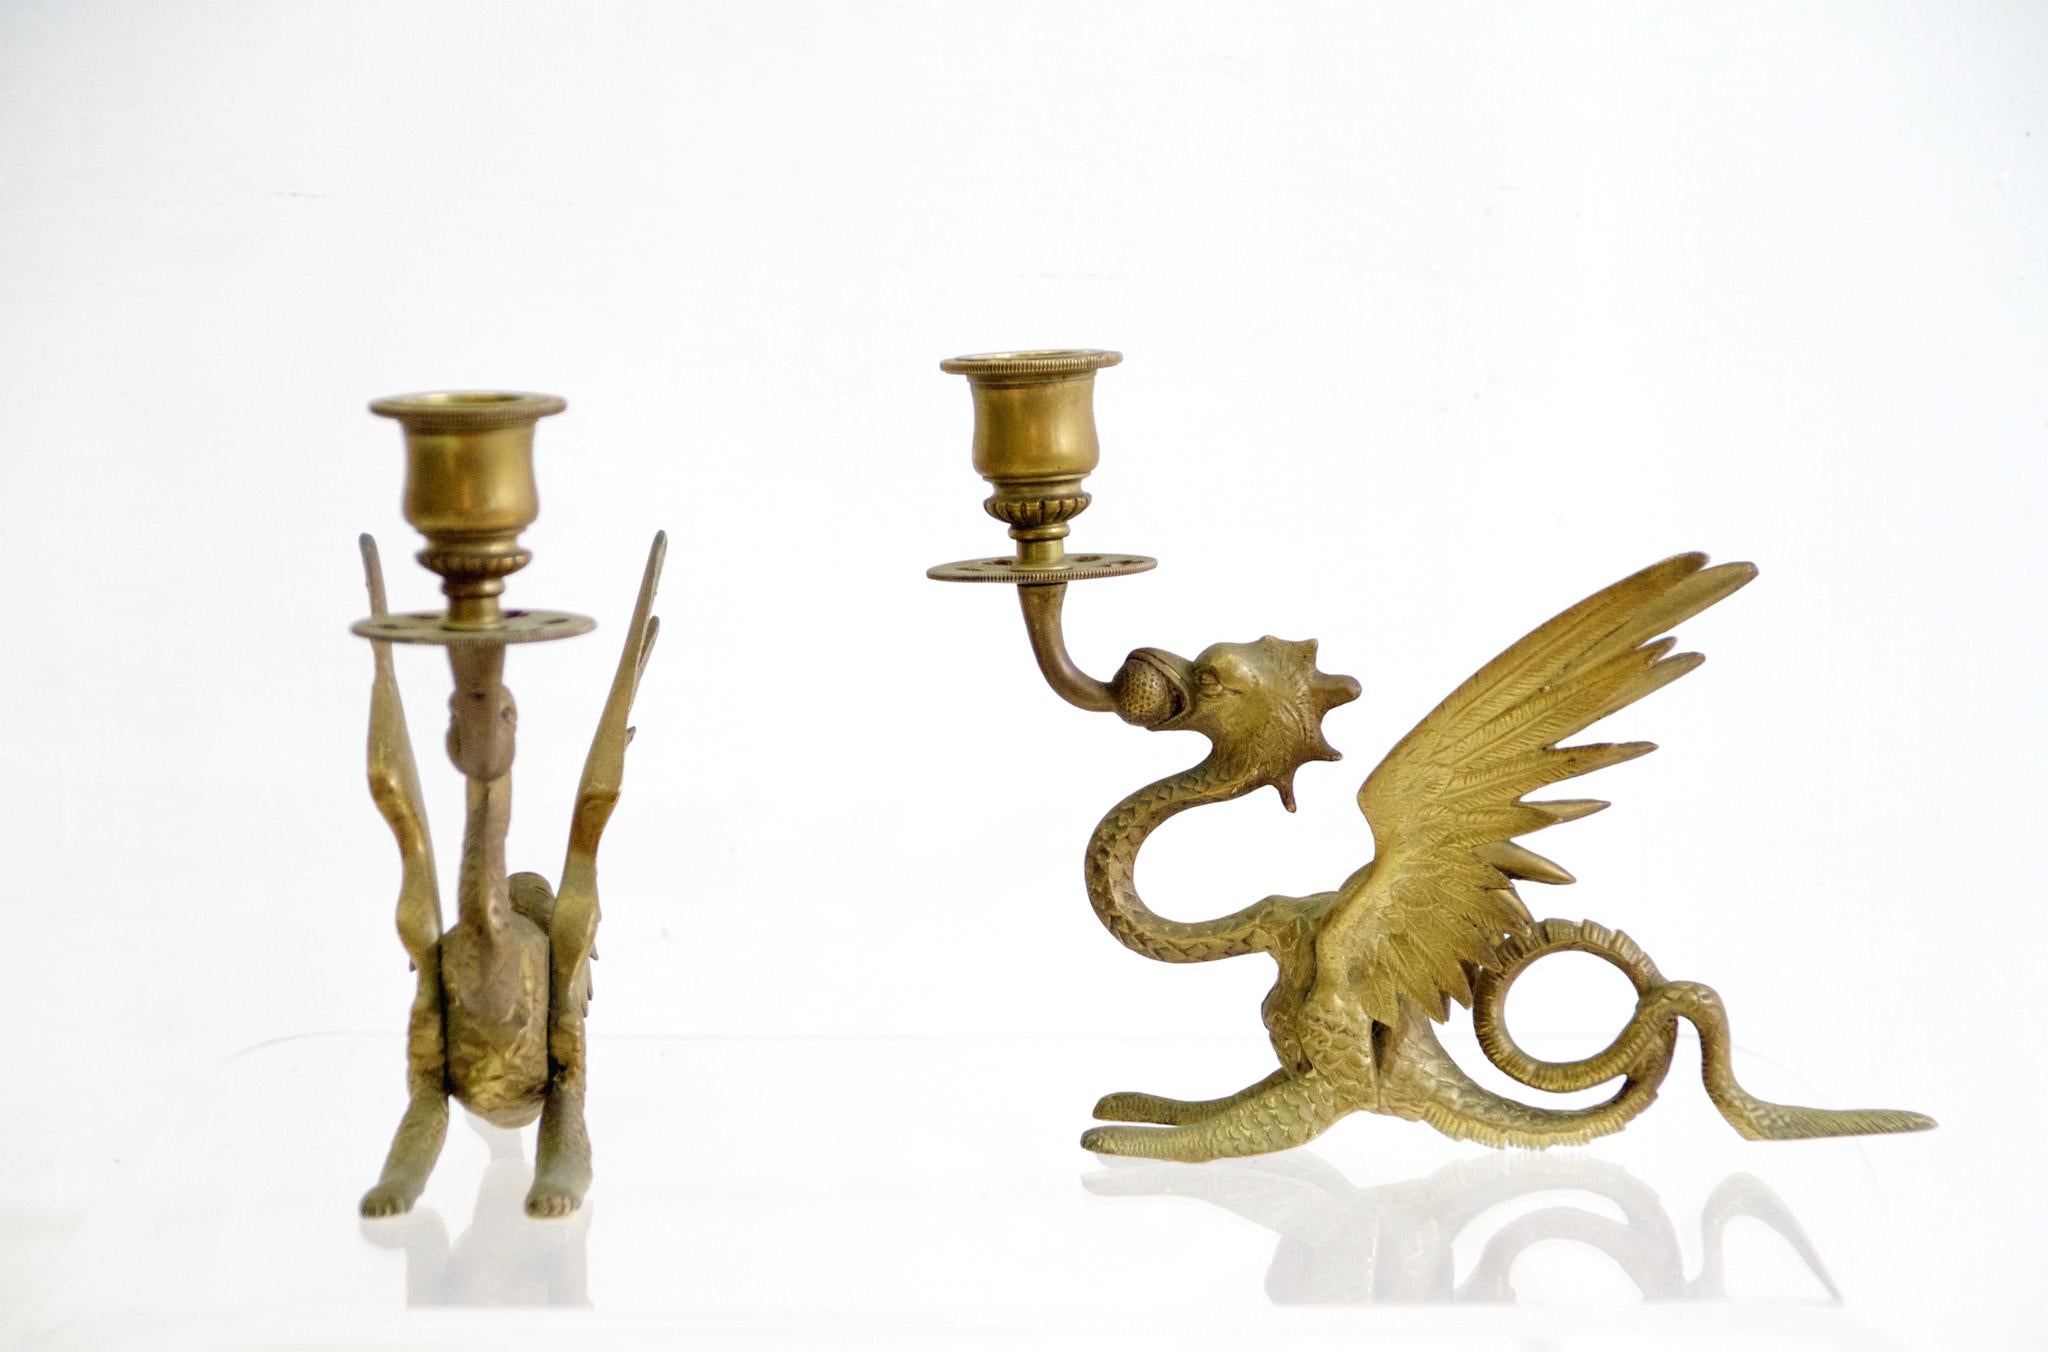 A great pair of candleholders in solid bronze made in France in early 20th century.